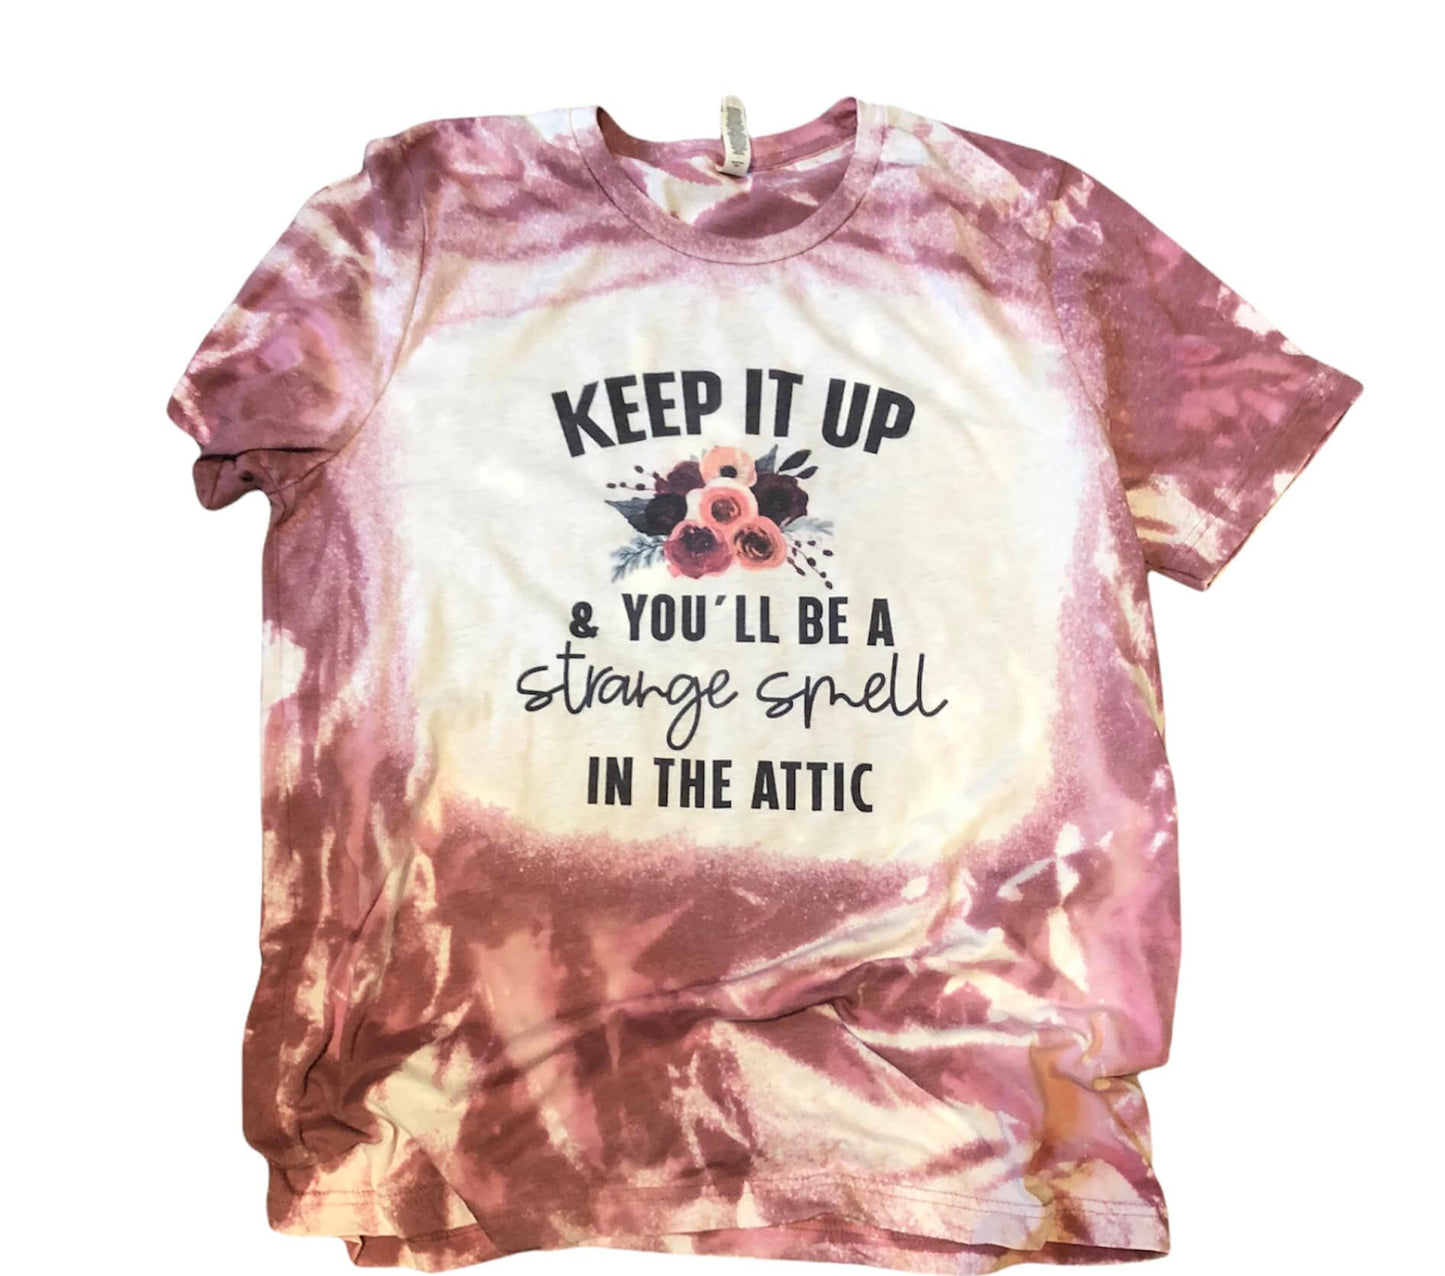 Keep it Up & You'll be a Strange Smell in the Attic Bleached Unisex Shirt